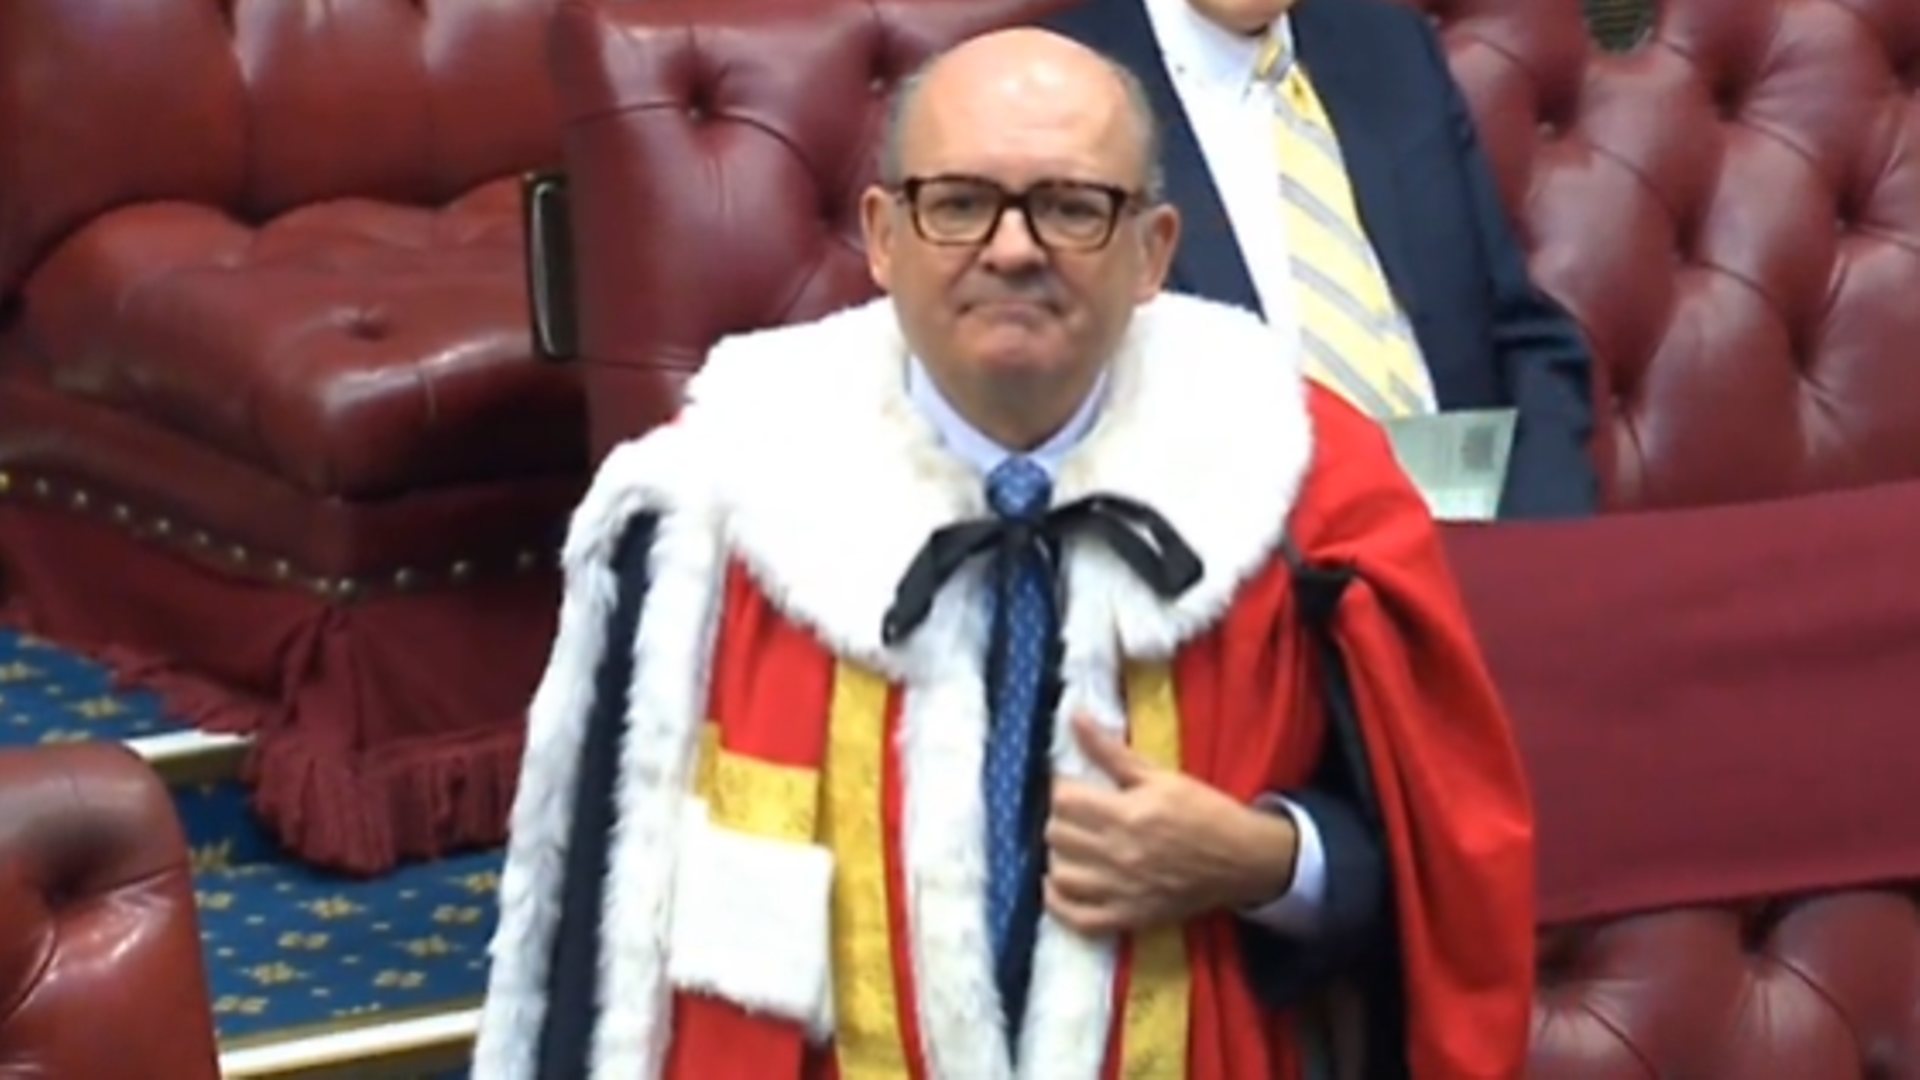 Michael Spencer in the House of Lords - Credit: Parliament Live